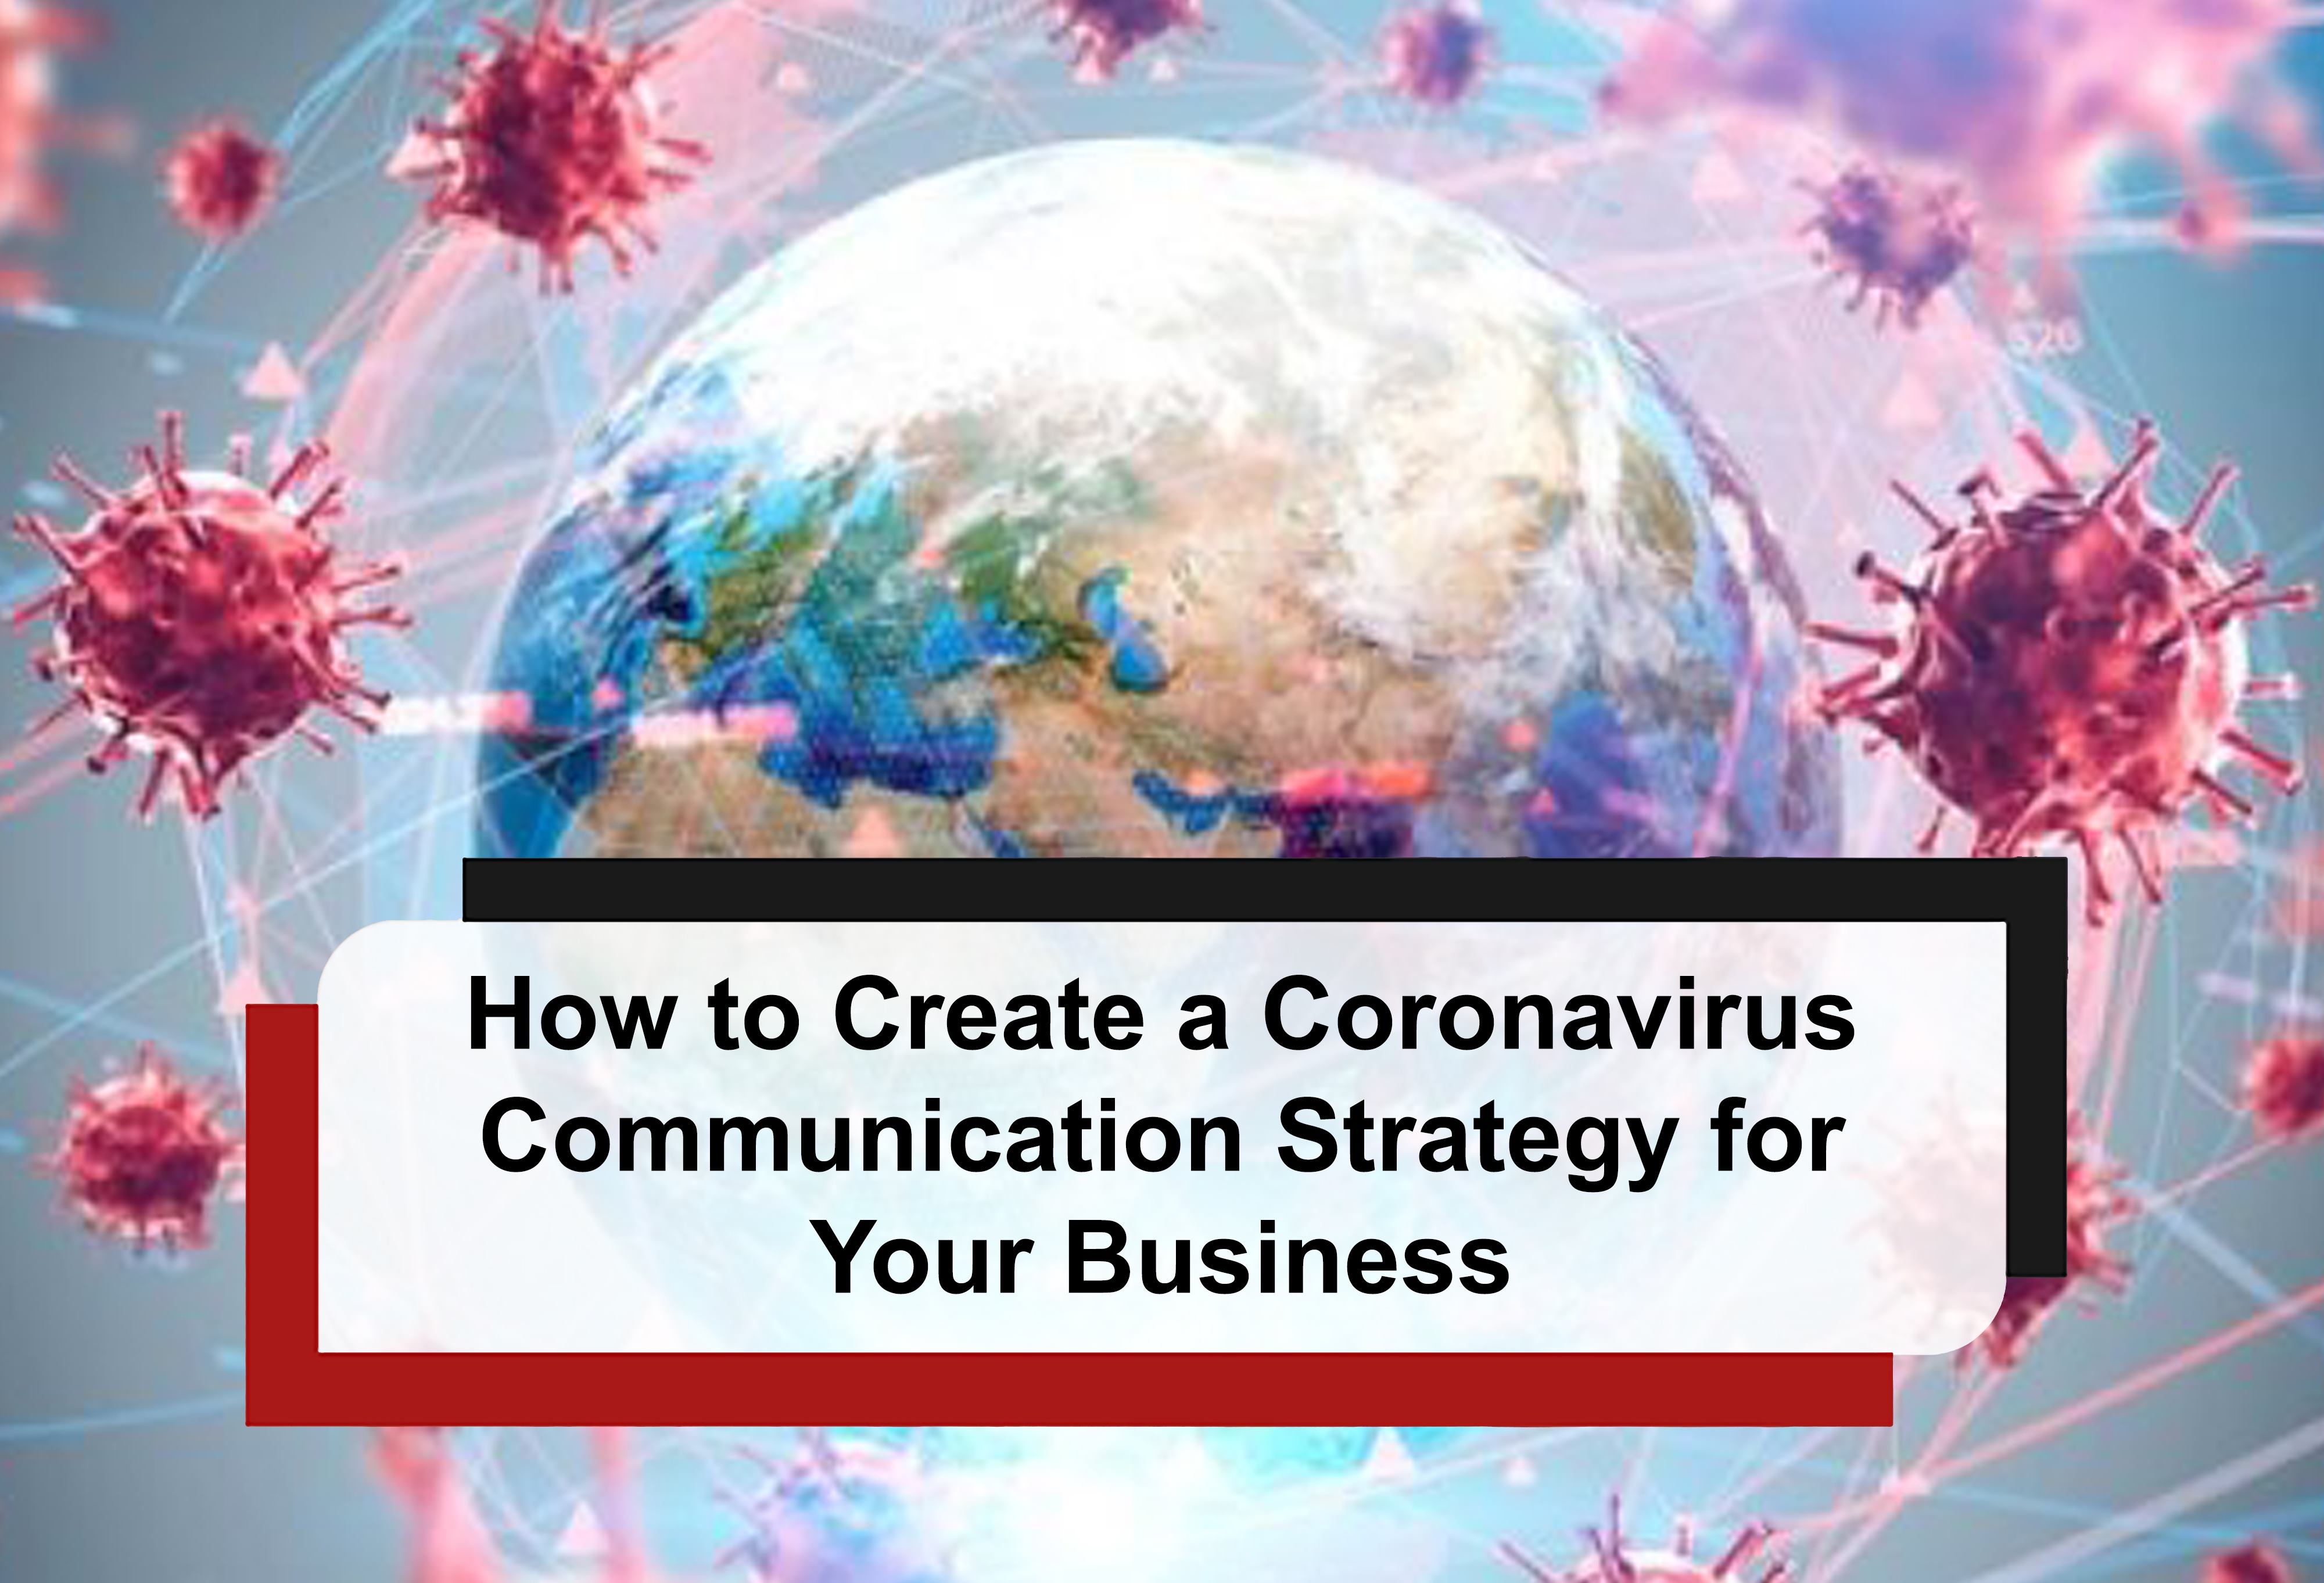 You are currently viewing Guide on Financial Planning in Toronto and How to Create a Coronavirus Communication Strategy for Your Business